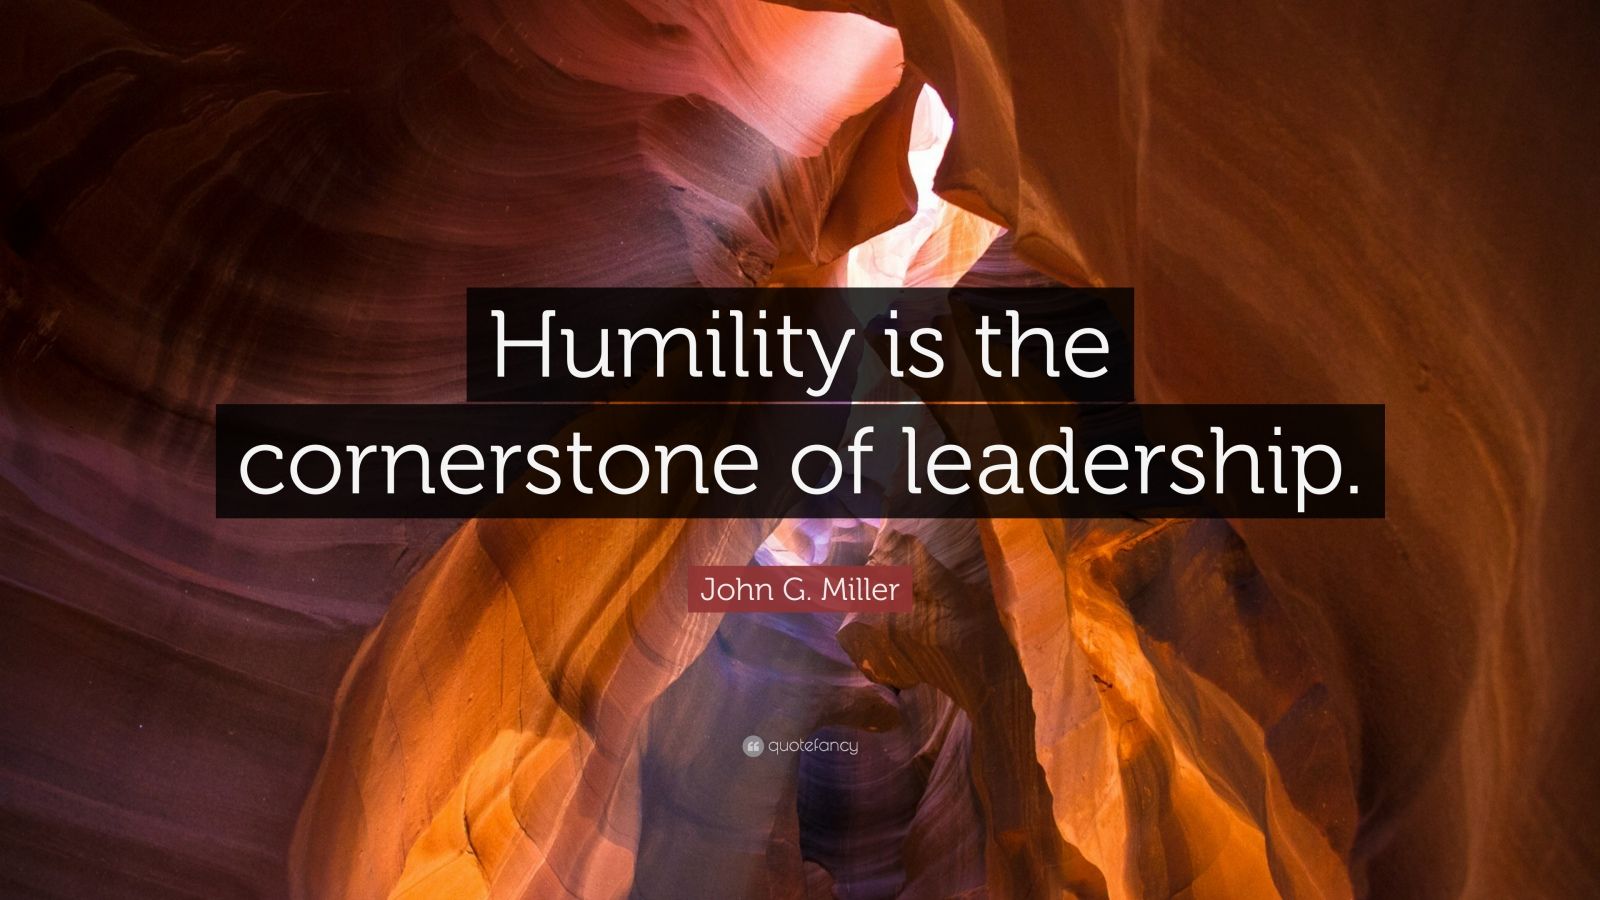 John G Miller Quote “humility Is The Cornerstone Of Leadership” 7 Wallpapers Quotefancy 7041